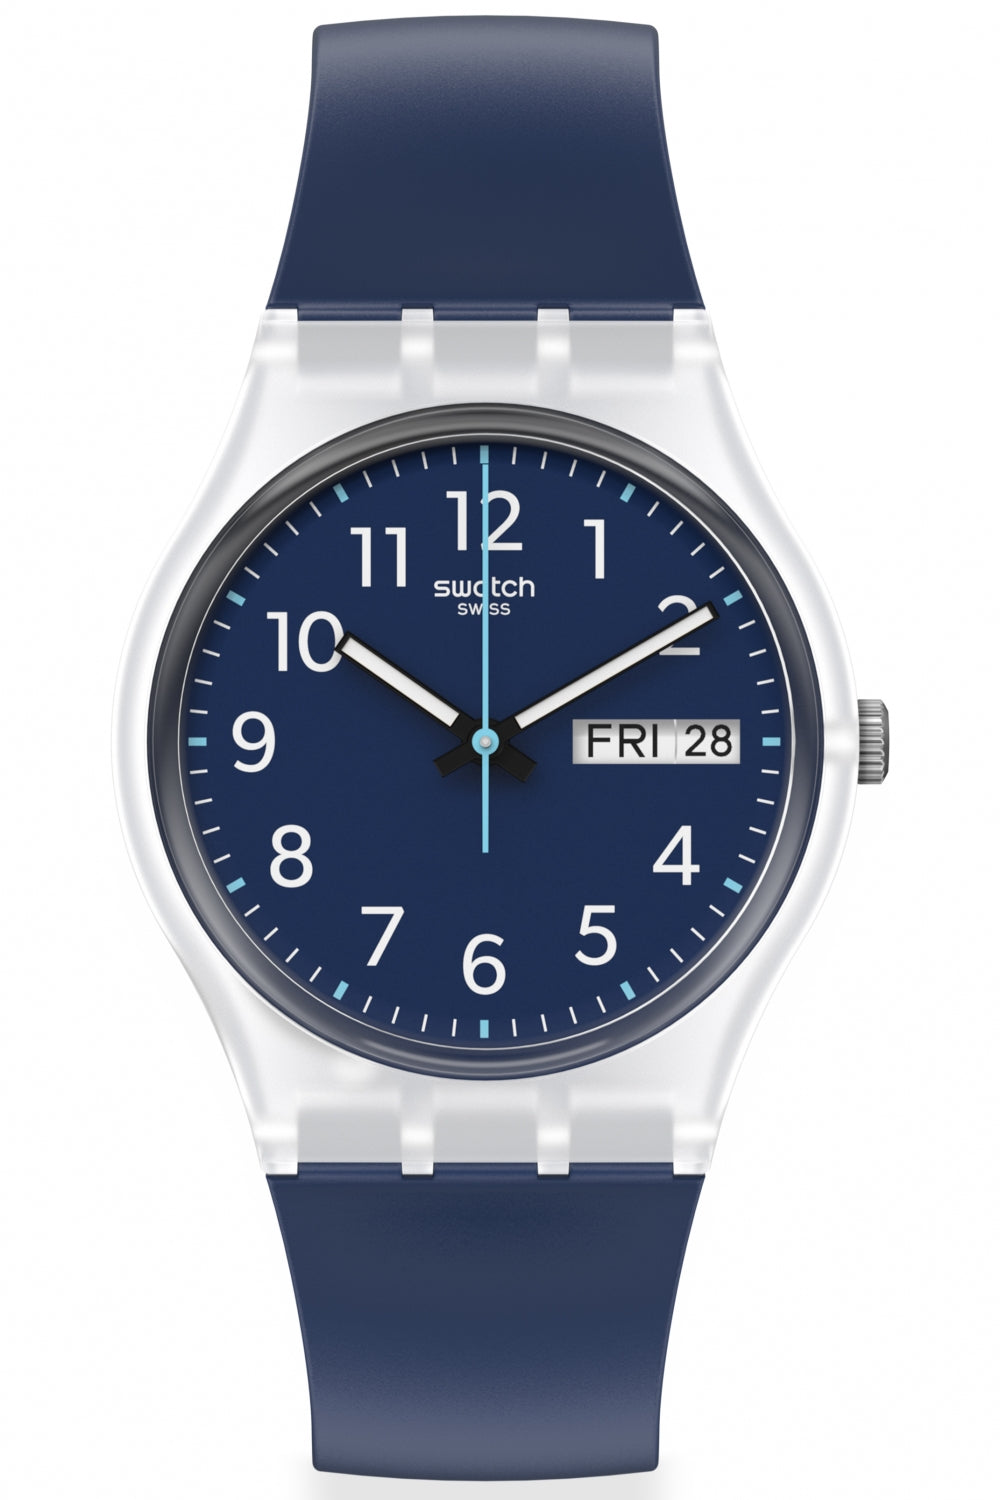 Swatch Rinse Repeat Navy Watch